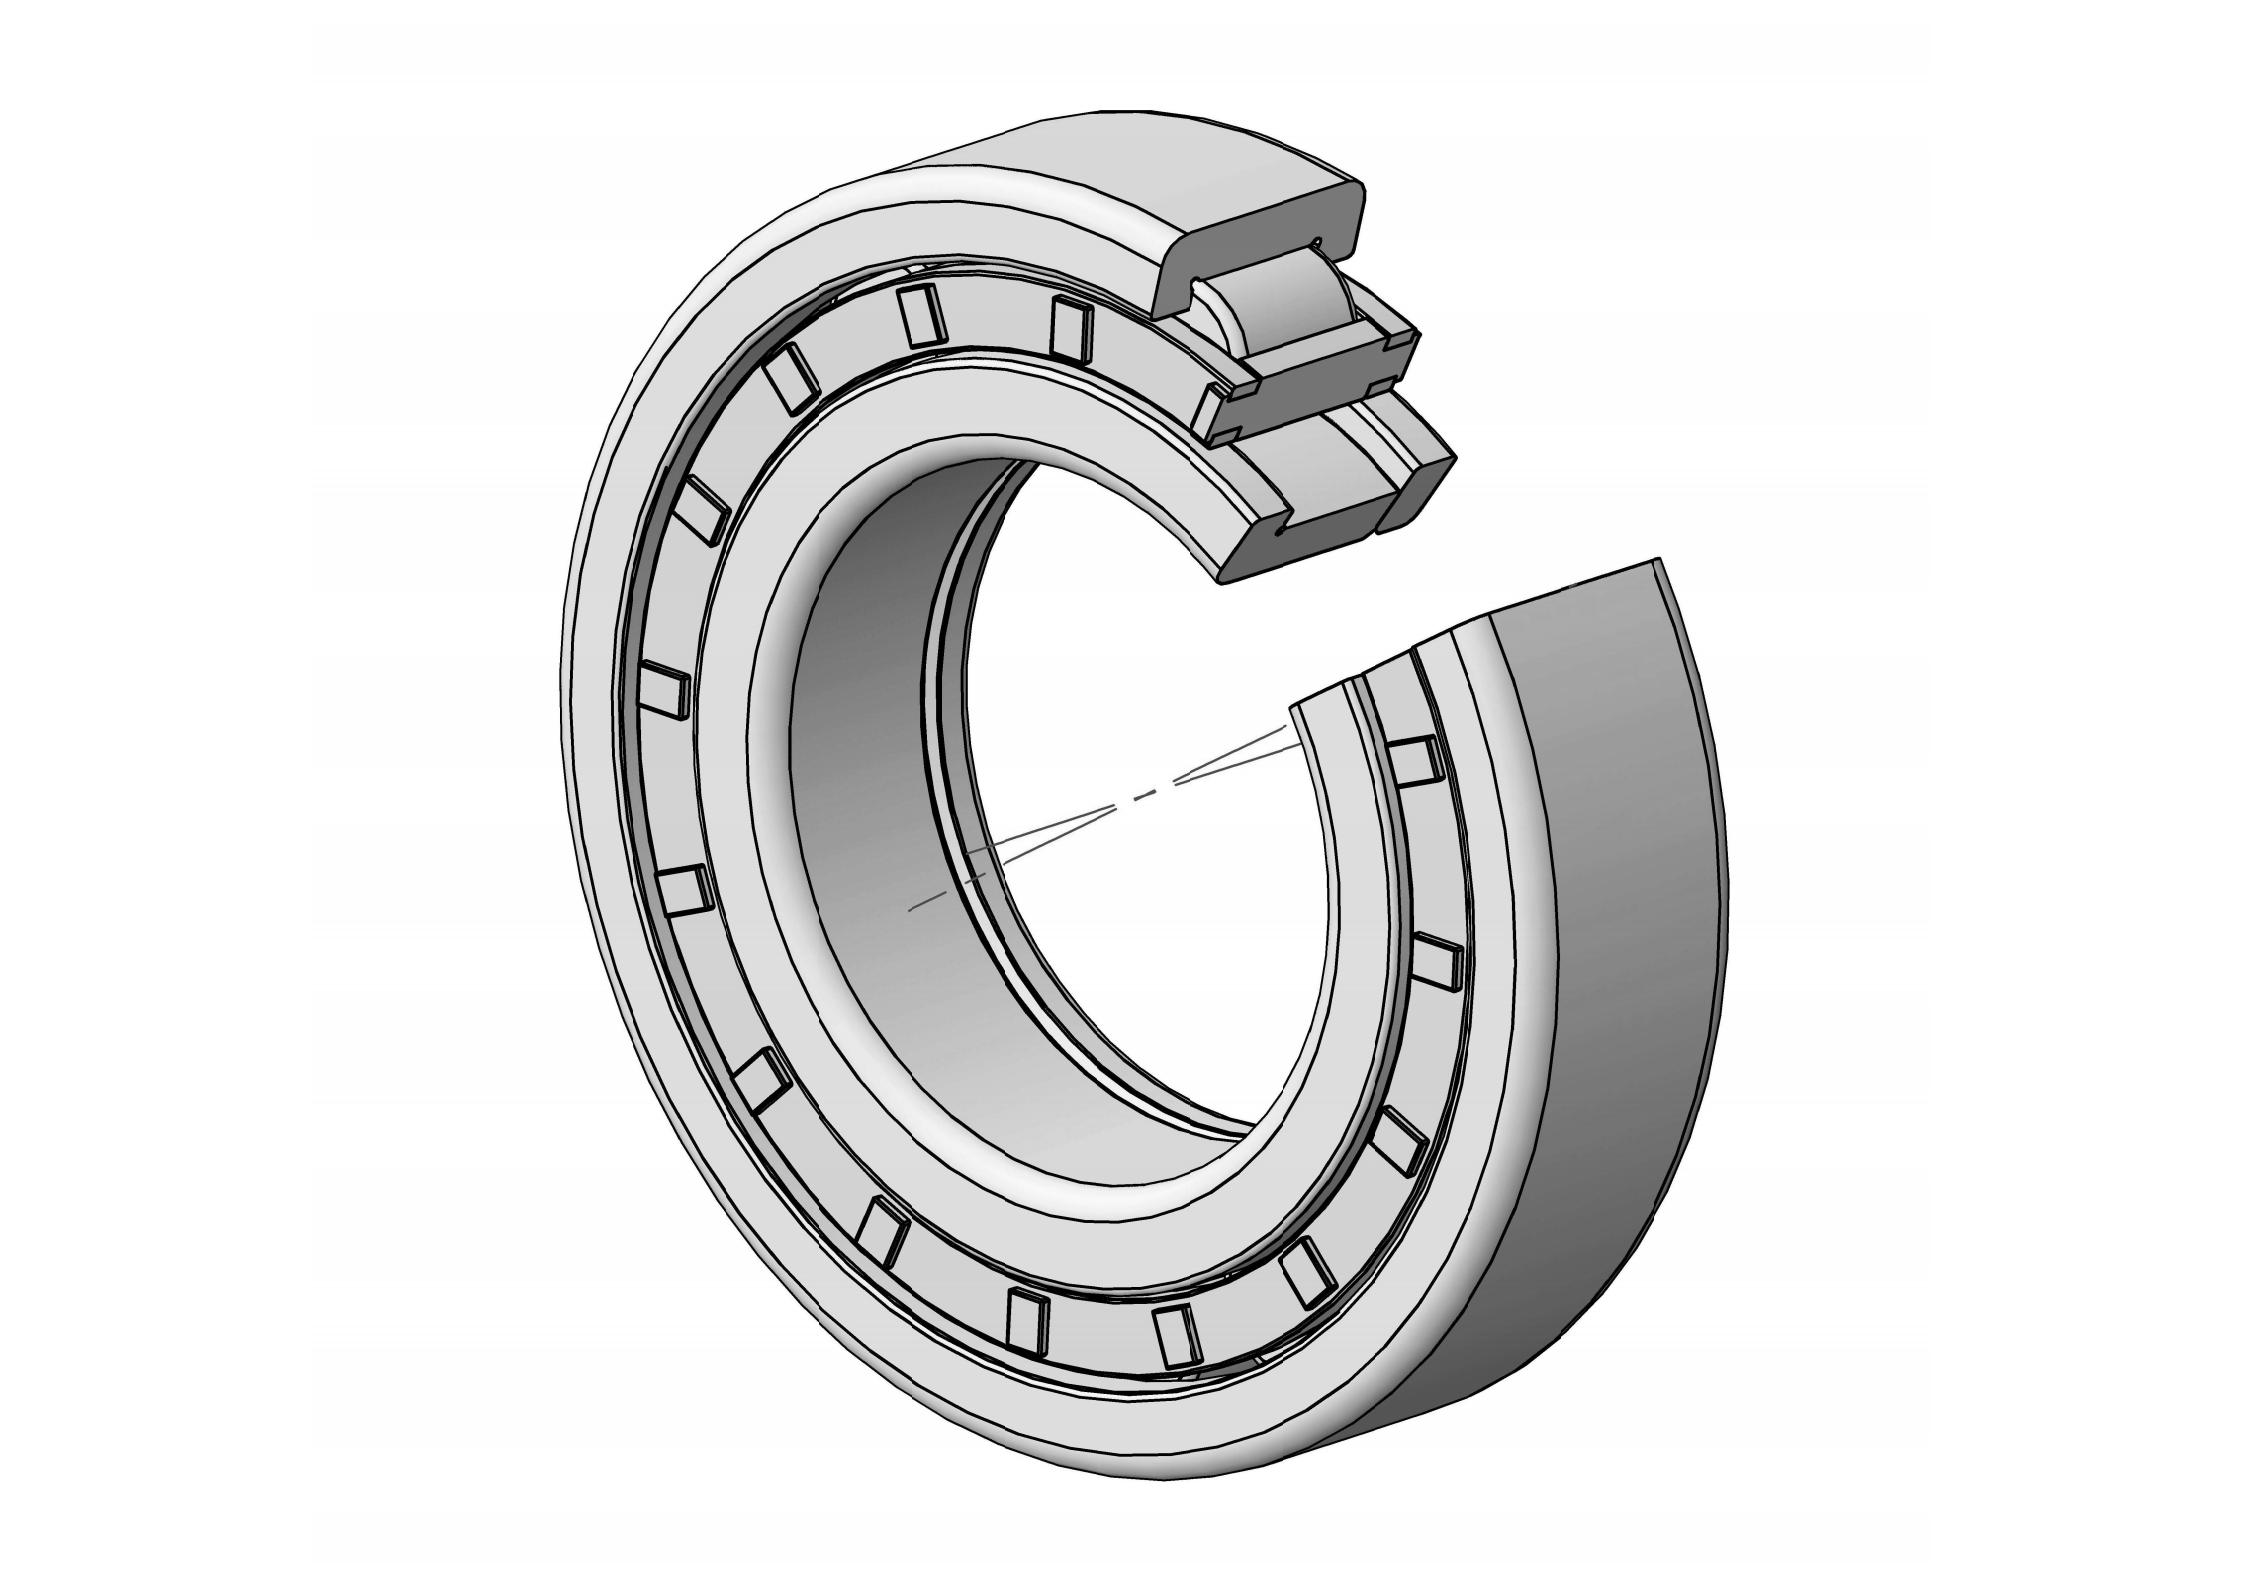 NUP206-E Single Row Cylindrical roller bearing 